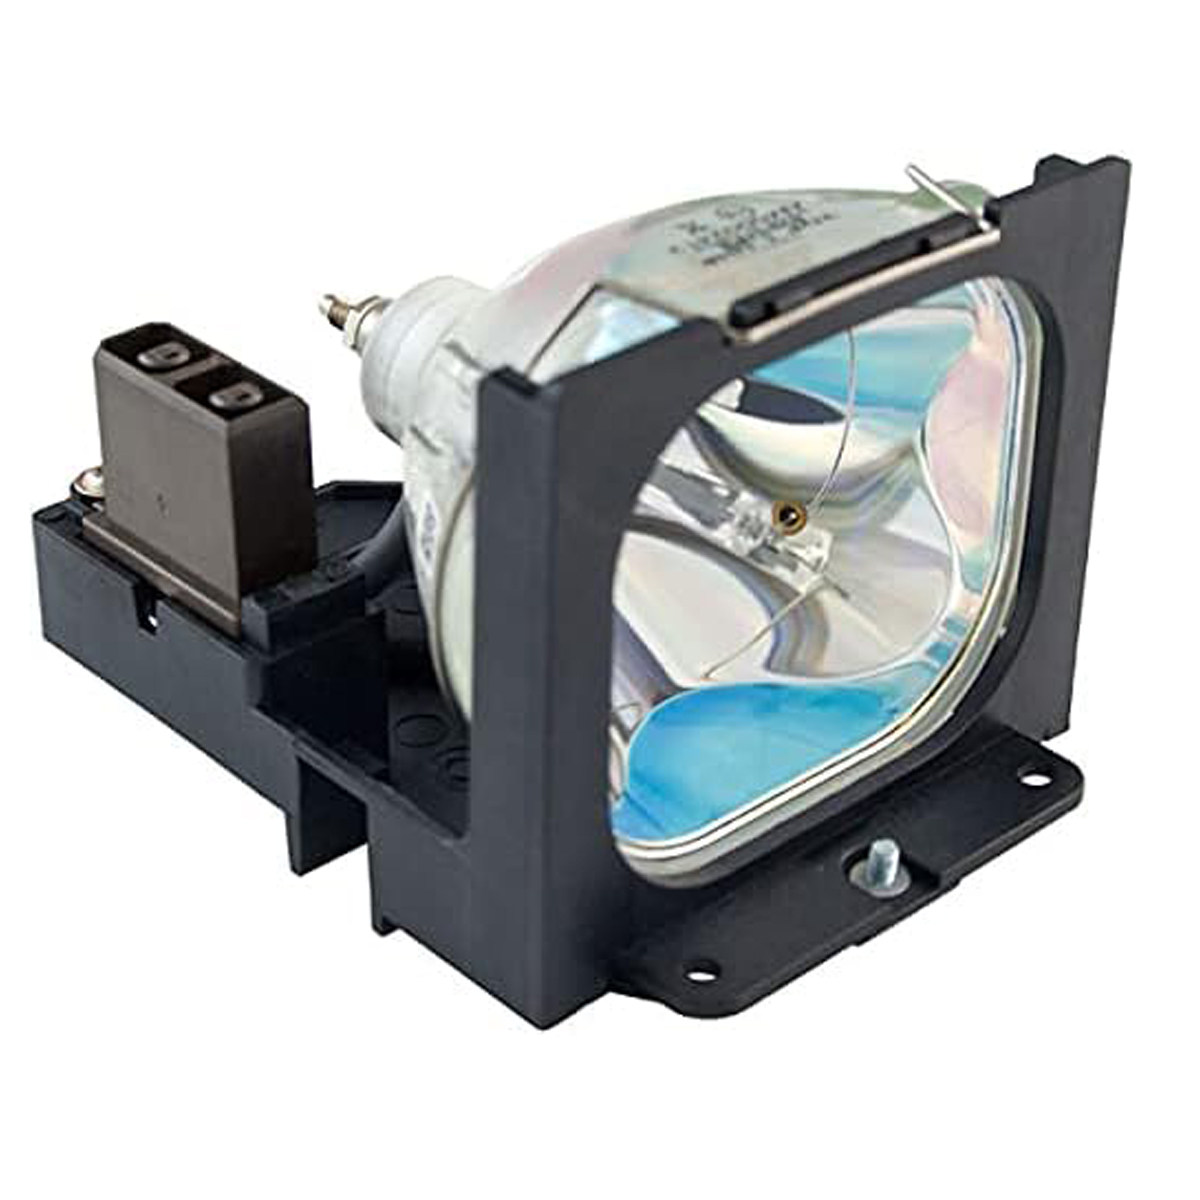 Replacement Projector lamp TLPL6 For Toshiba TLP 450 TLP 451 TLP 650 TLP 651